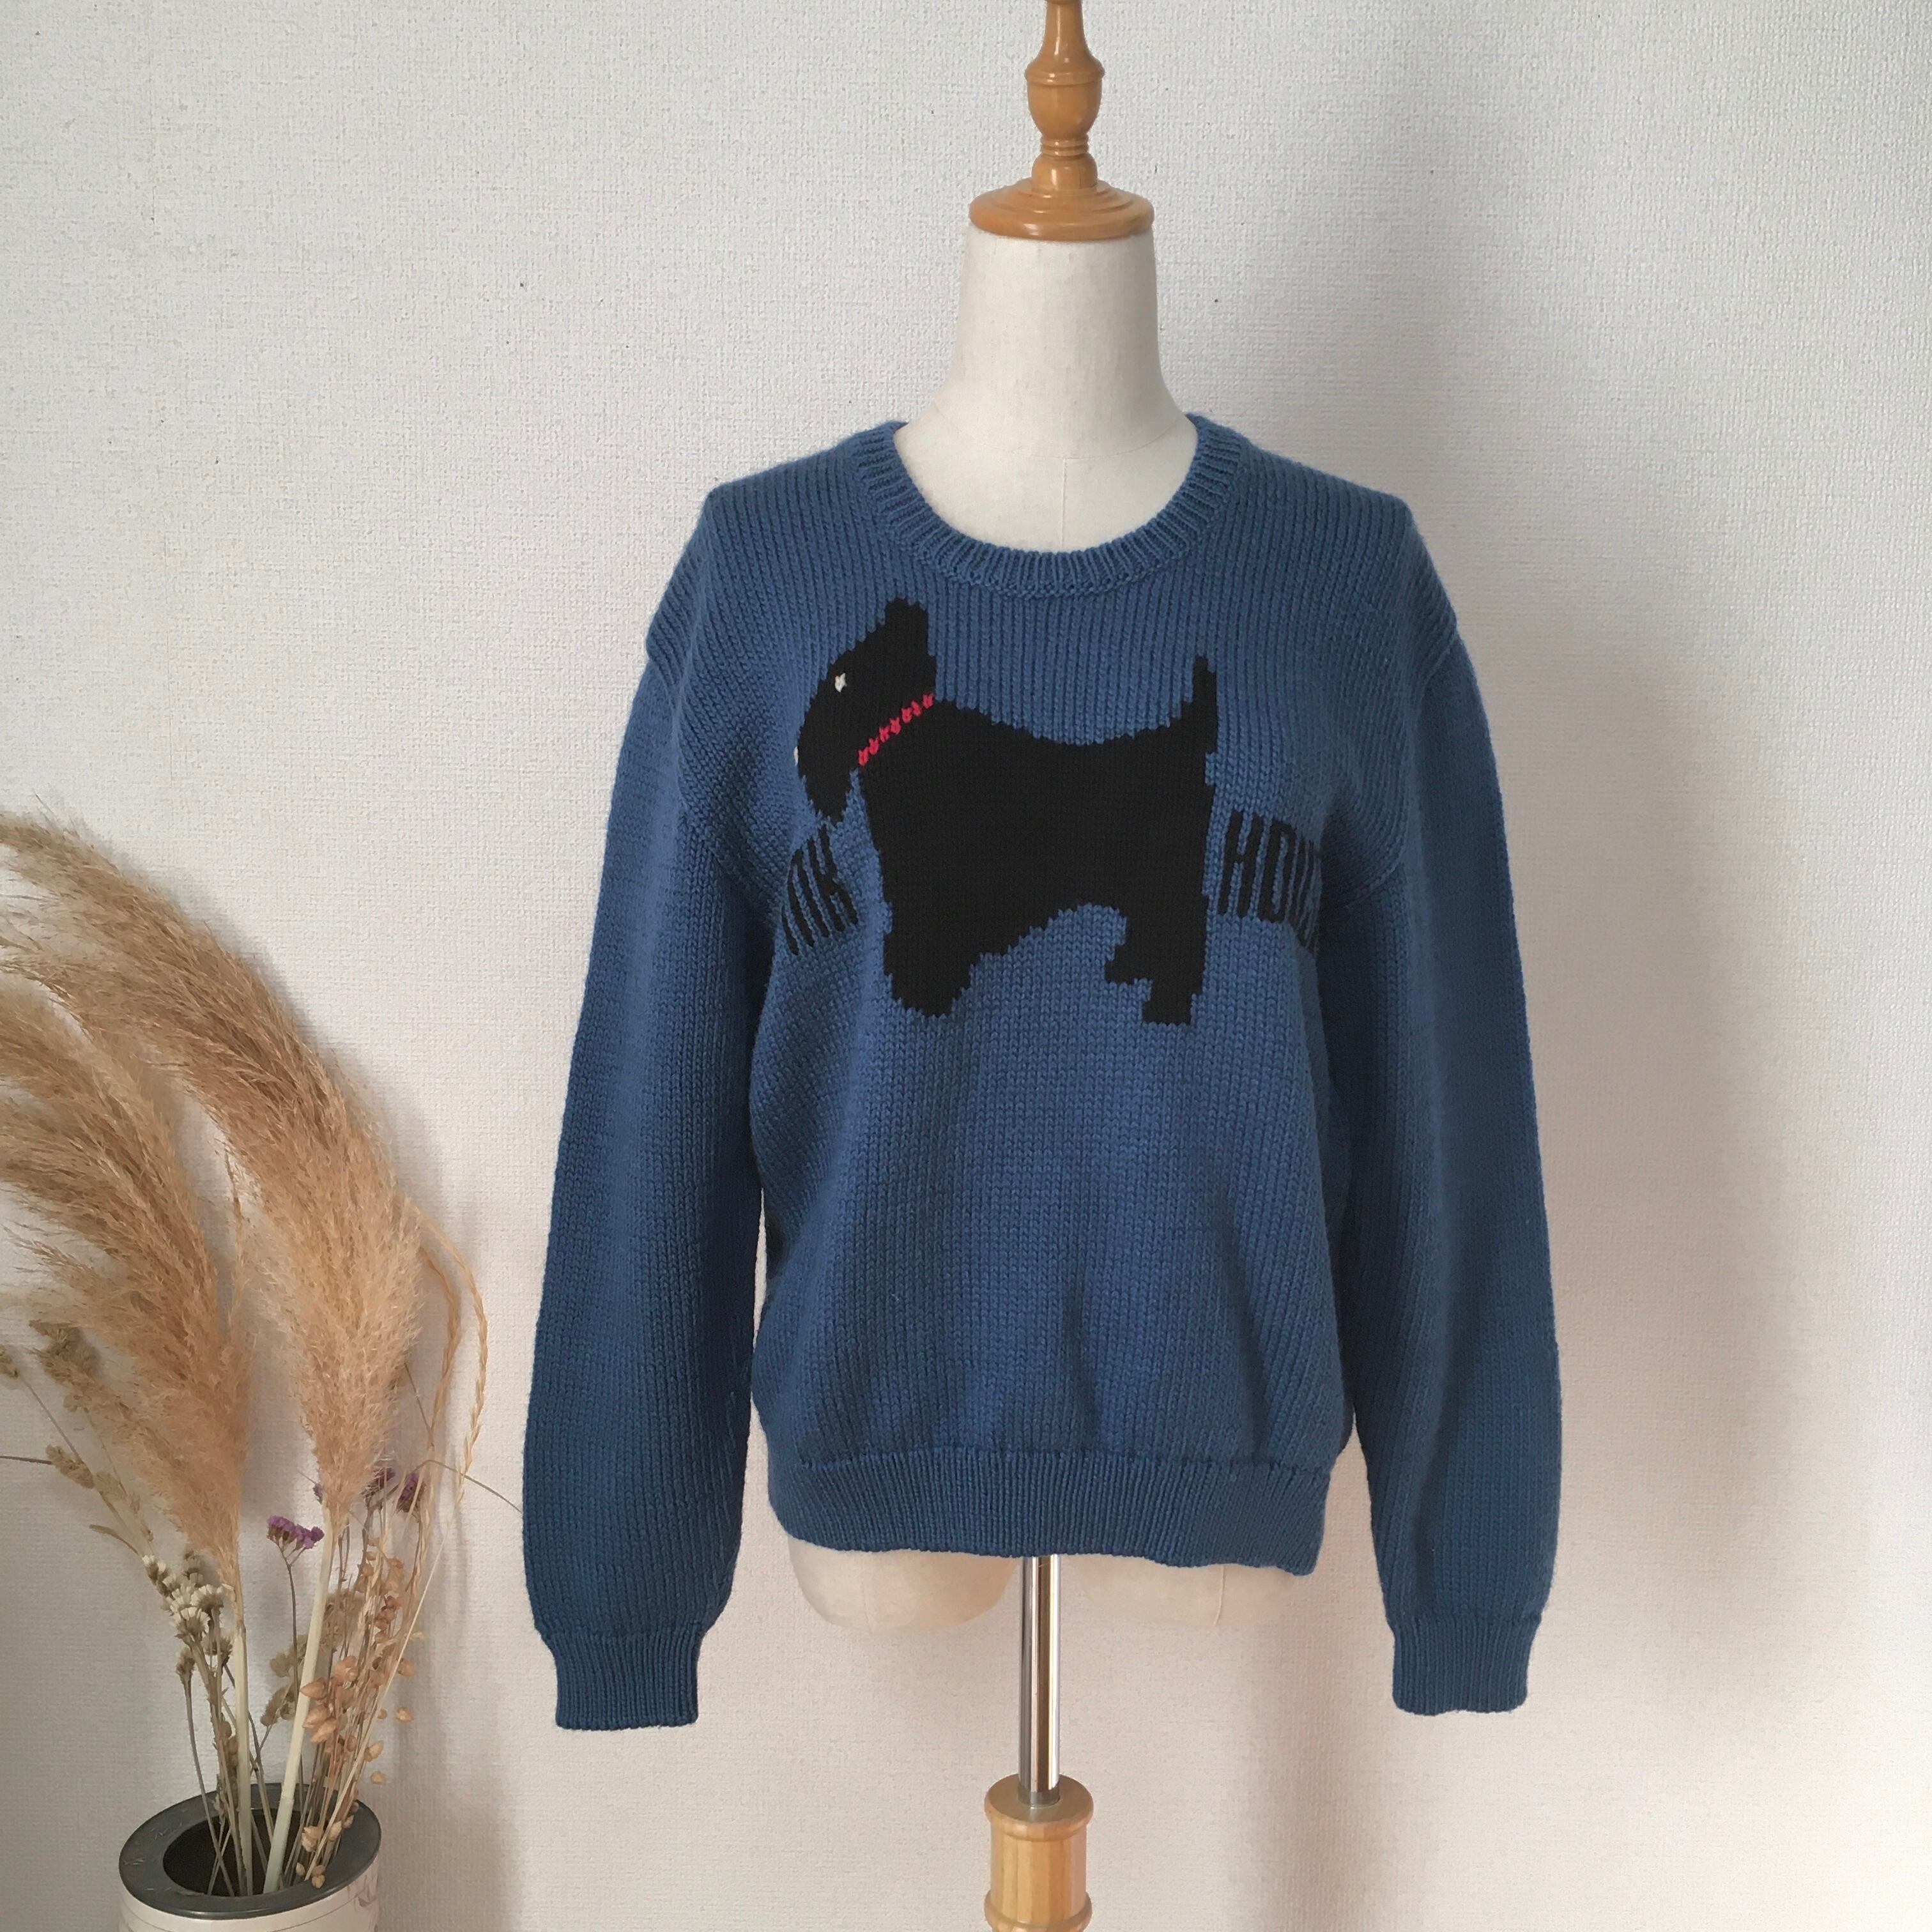 PINK HOUSE terrier motif knit〈レトロ古着 ピンクハウス テリア